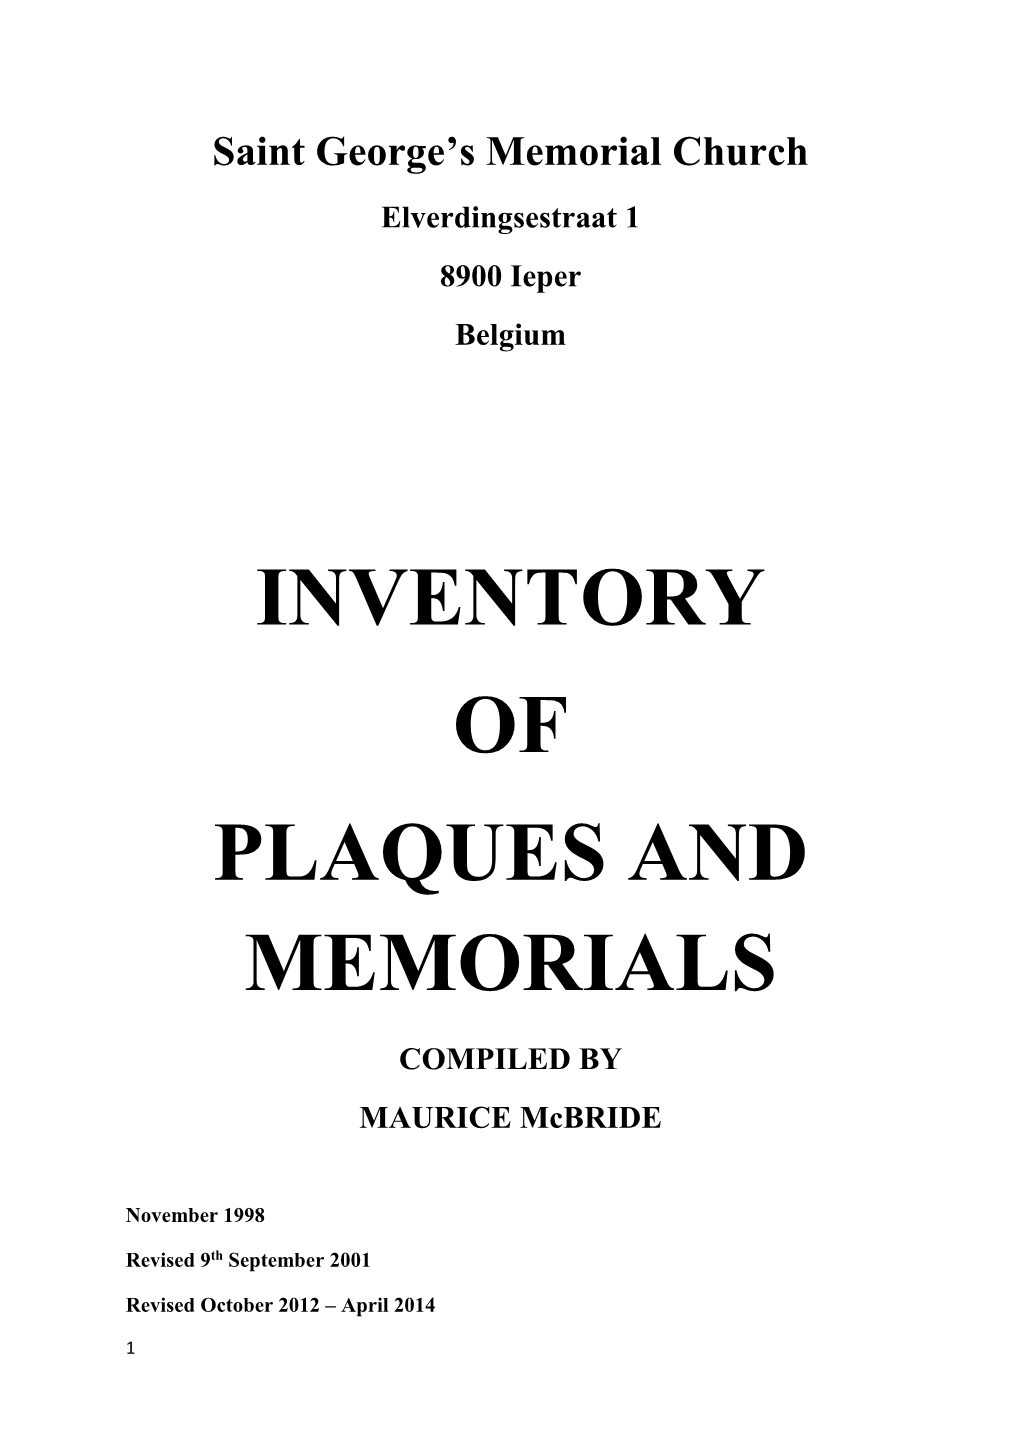 Inventory of Plaques and Memorials